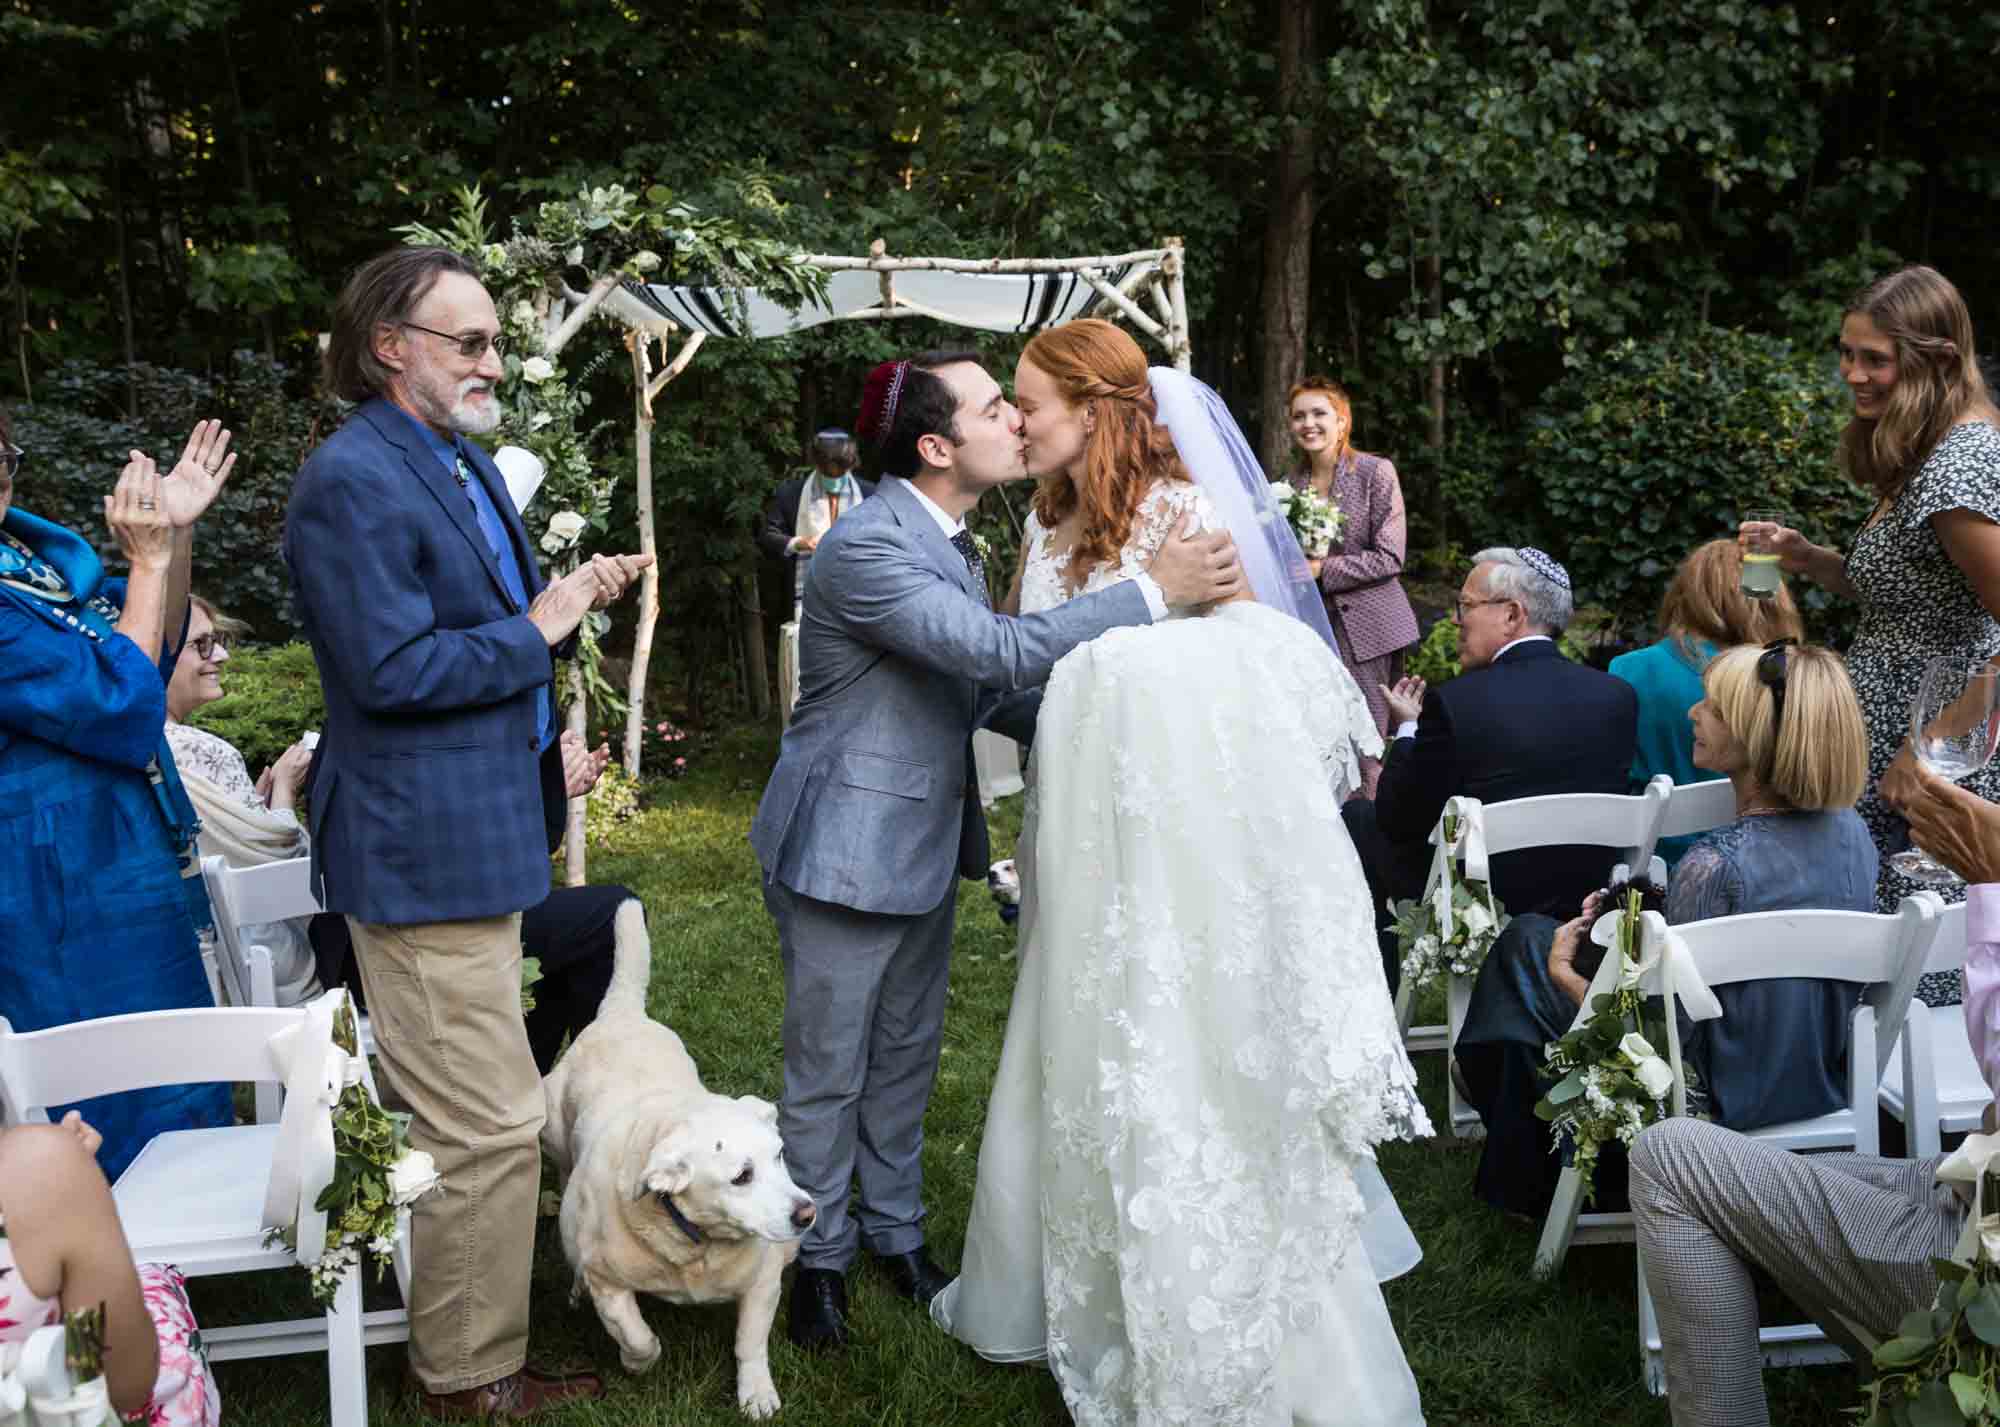 Bride and groom kissing in aisle in front of guests and dog during ceremony